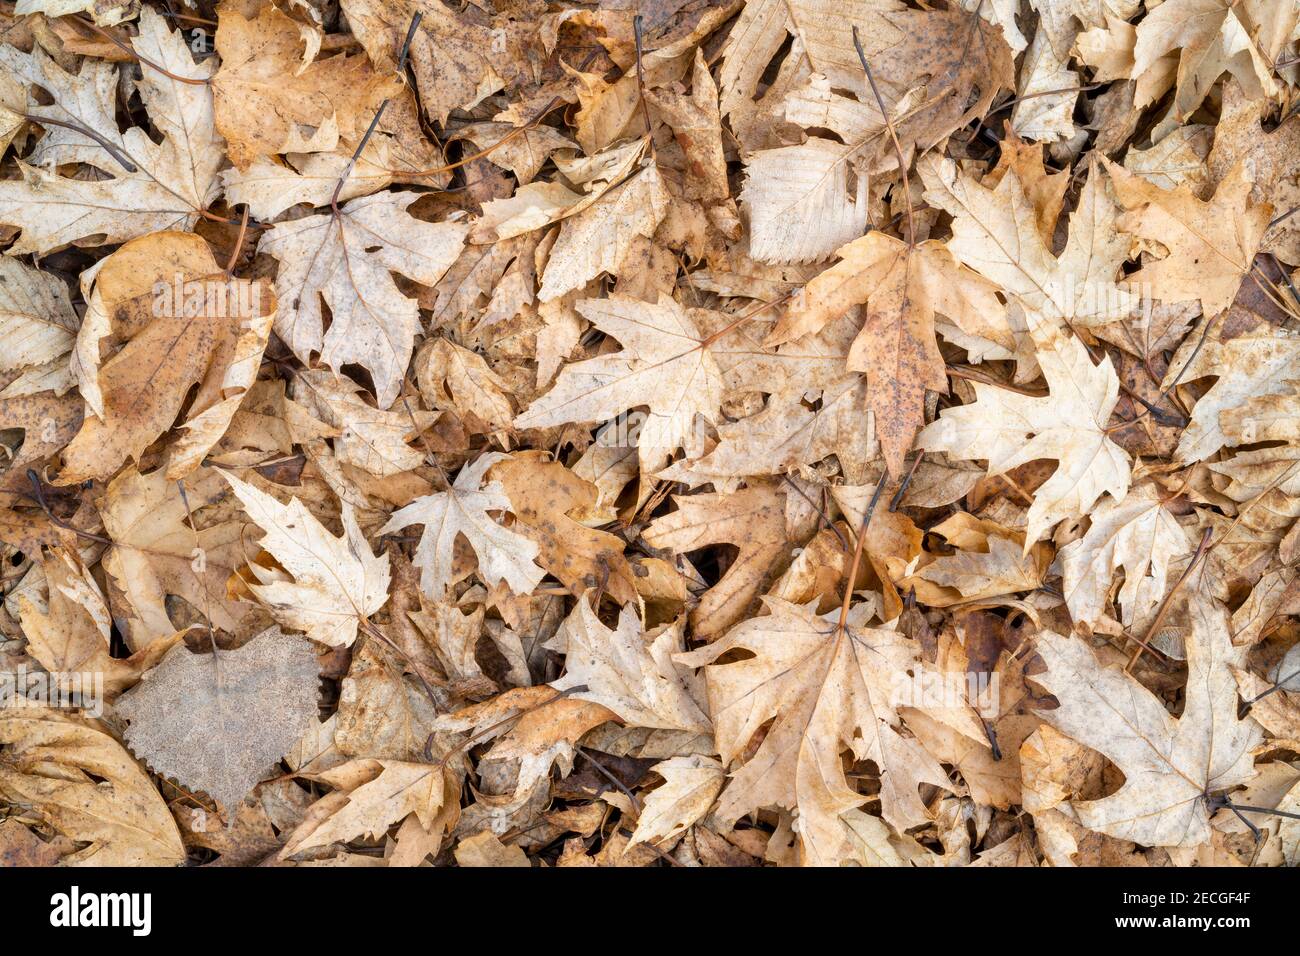 Silver maple, cottonwood and elm leaves, floodplain forest floor, deciduous forest, early winter, Midwestern USA, by Dominique Braud/Dembinsky Photo A Stock Photo